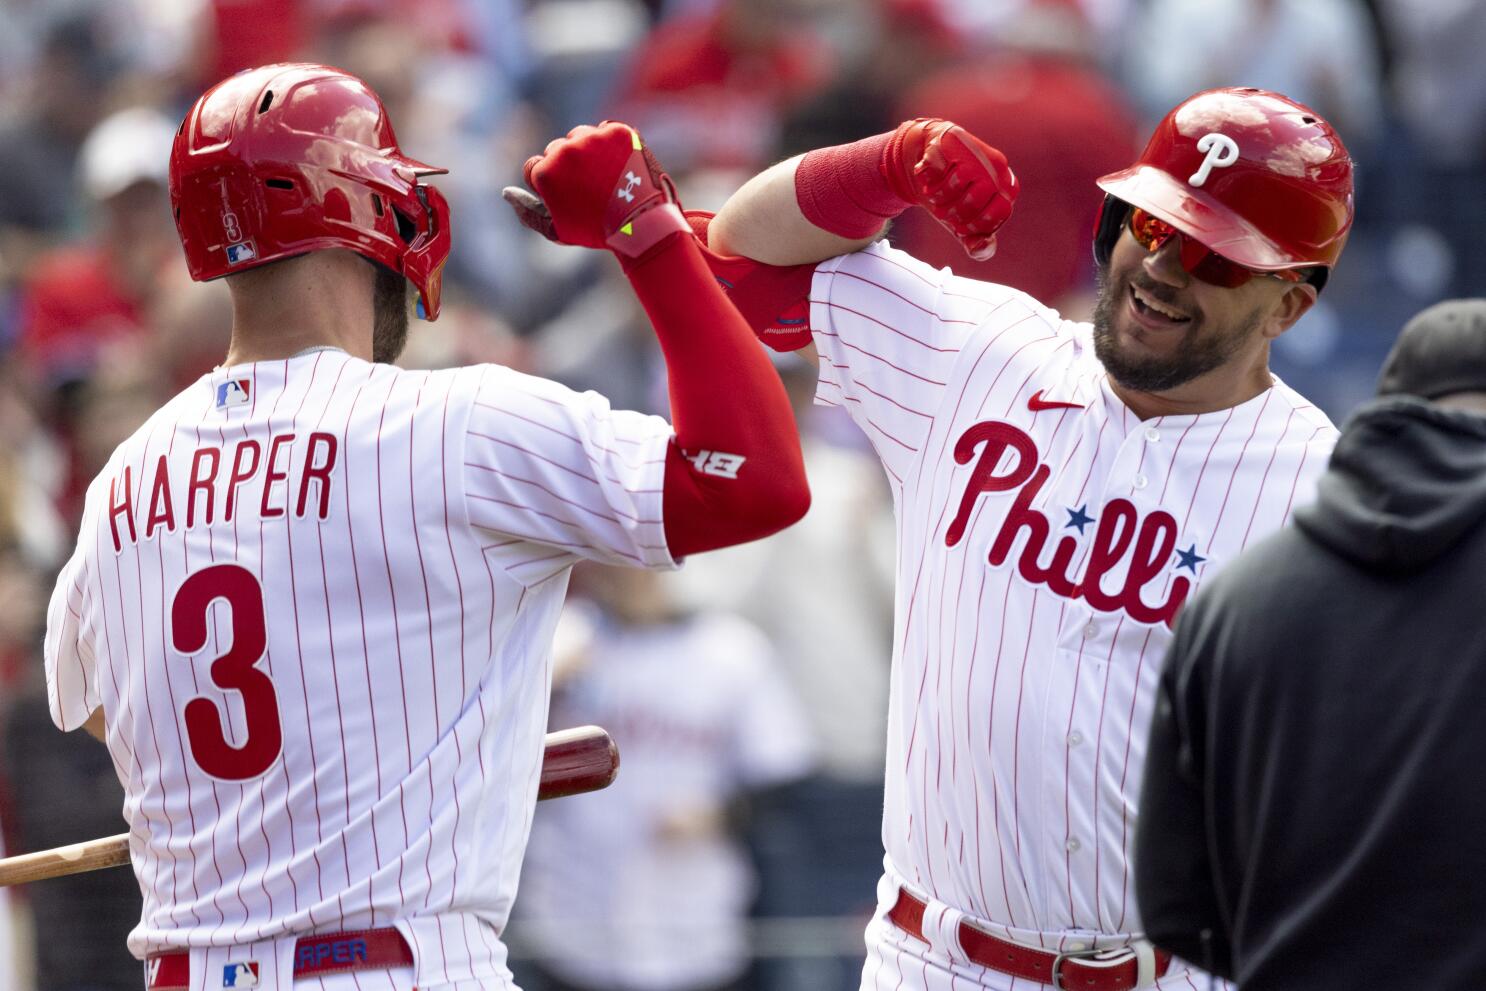 Kyle Schwarber goes deep for Phillies in 9-5 win over Athletics